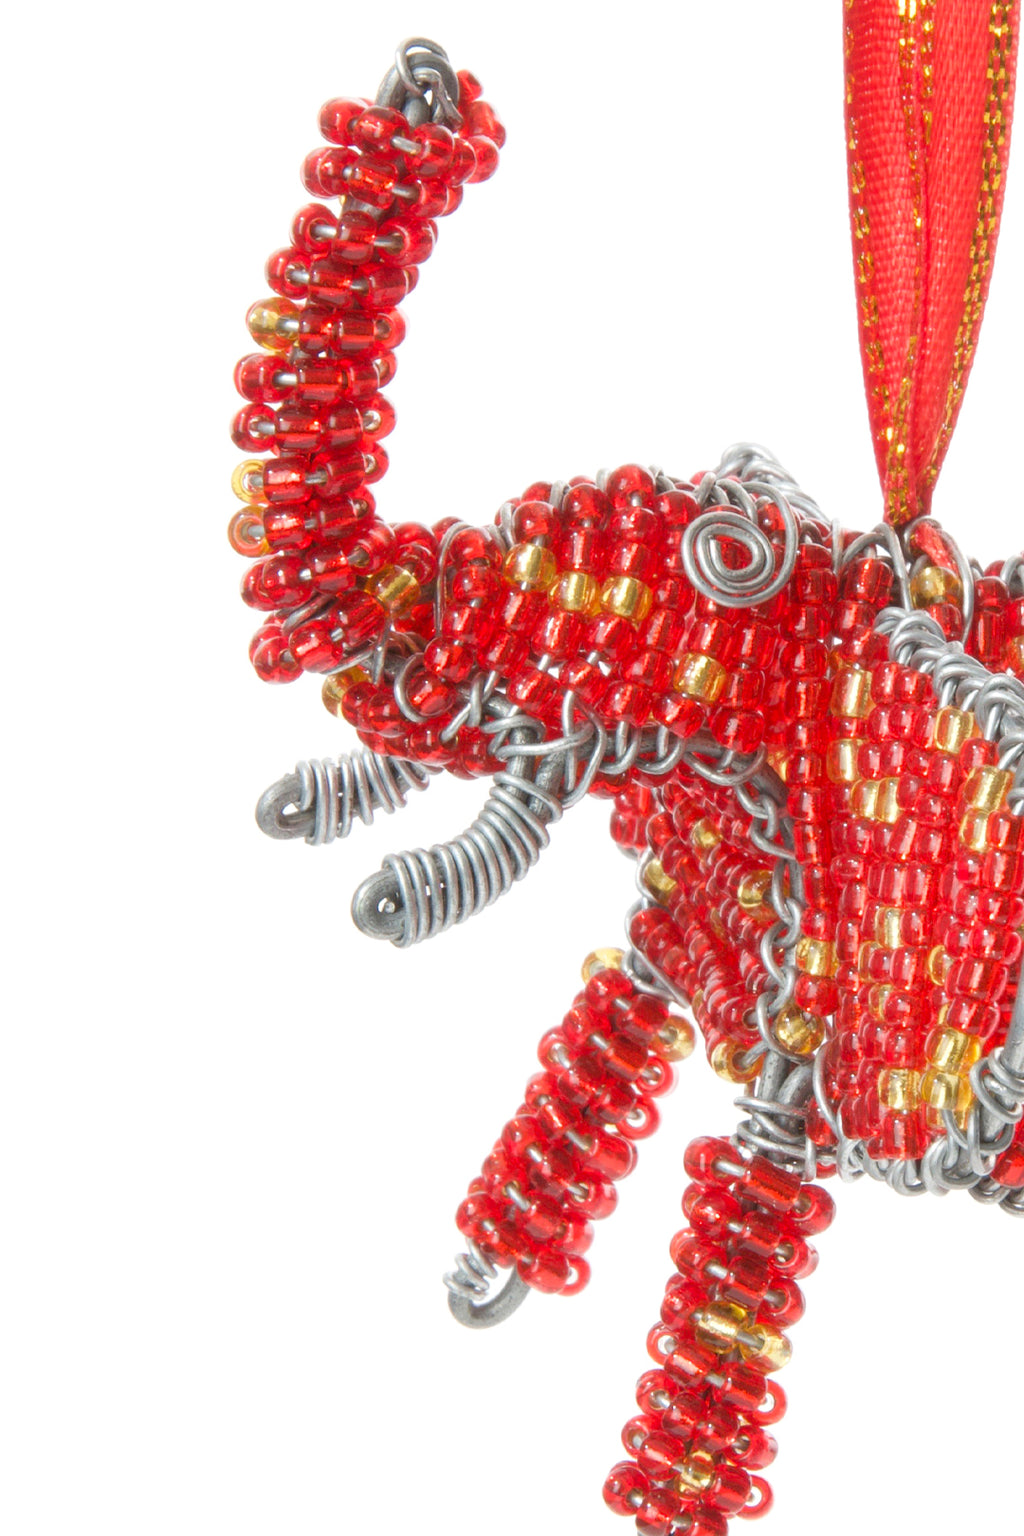 Red Beaded Wire Holiday Elephant Ornament